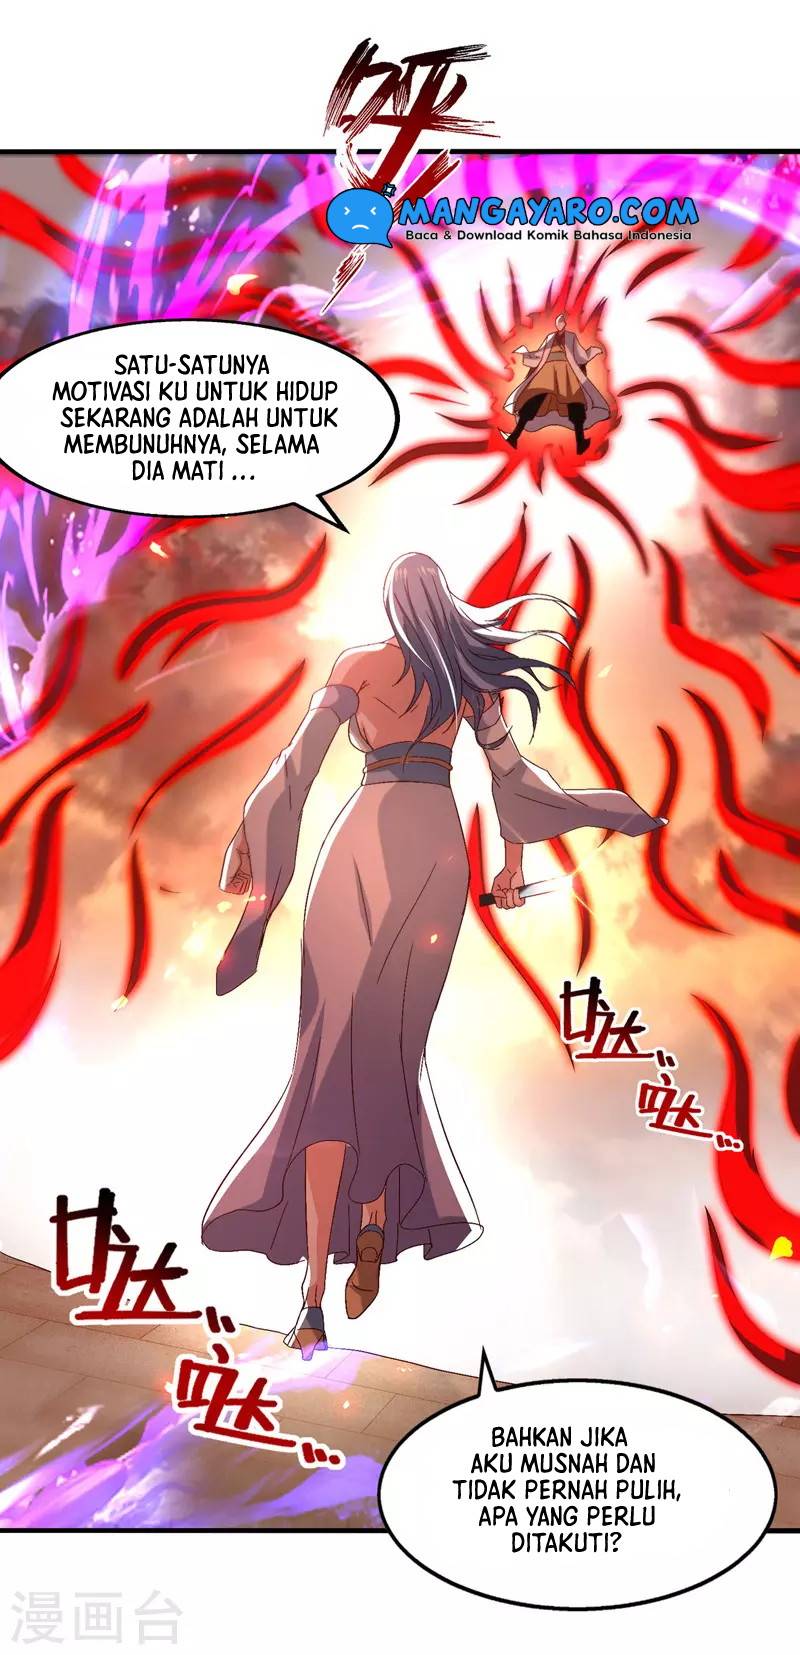 Against The Heaven Supreme (Heaven Guards) Chapter 75 - 157